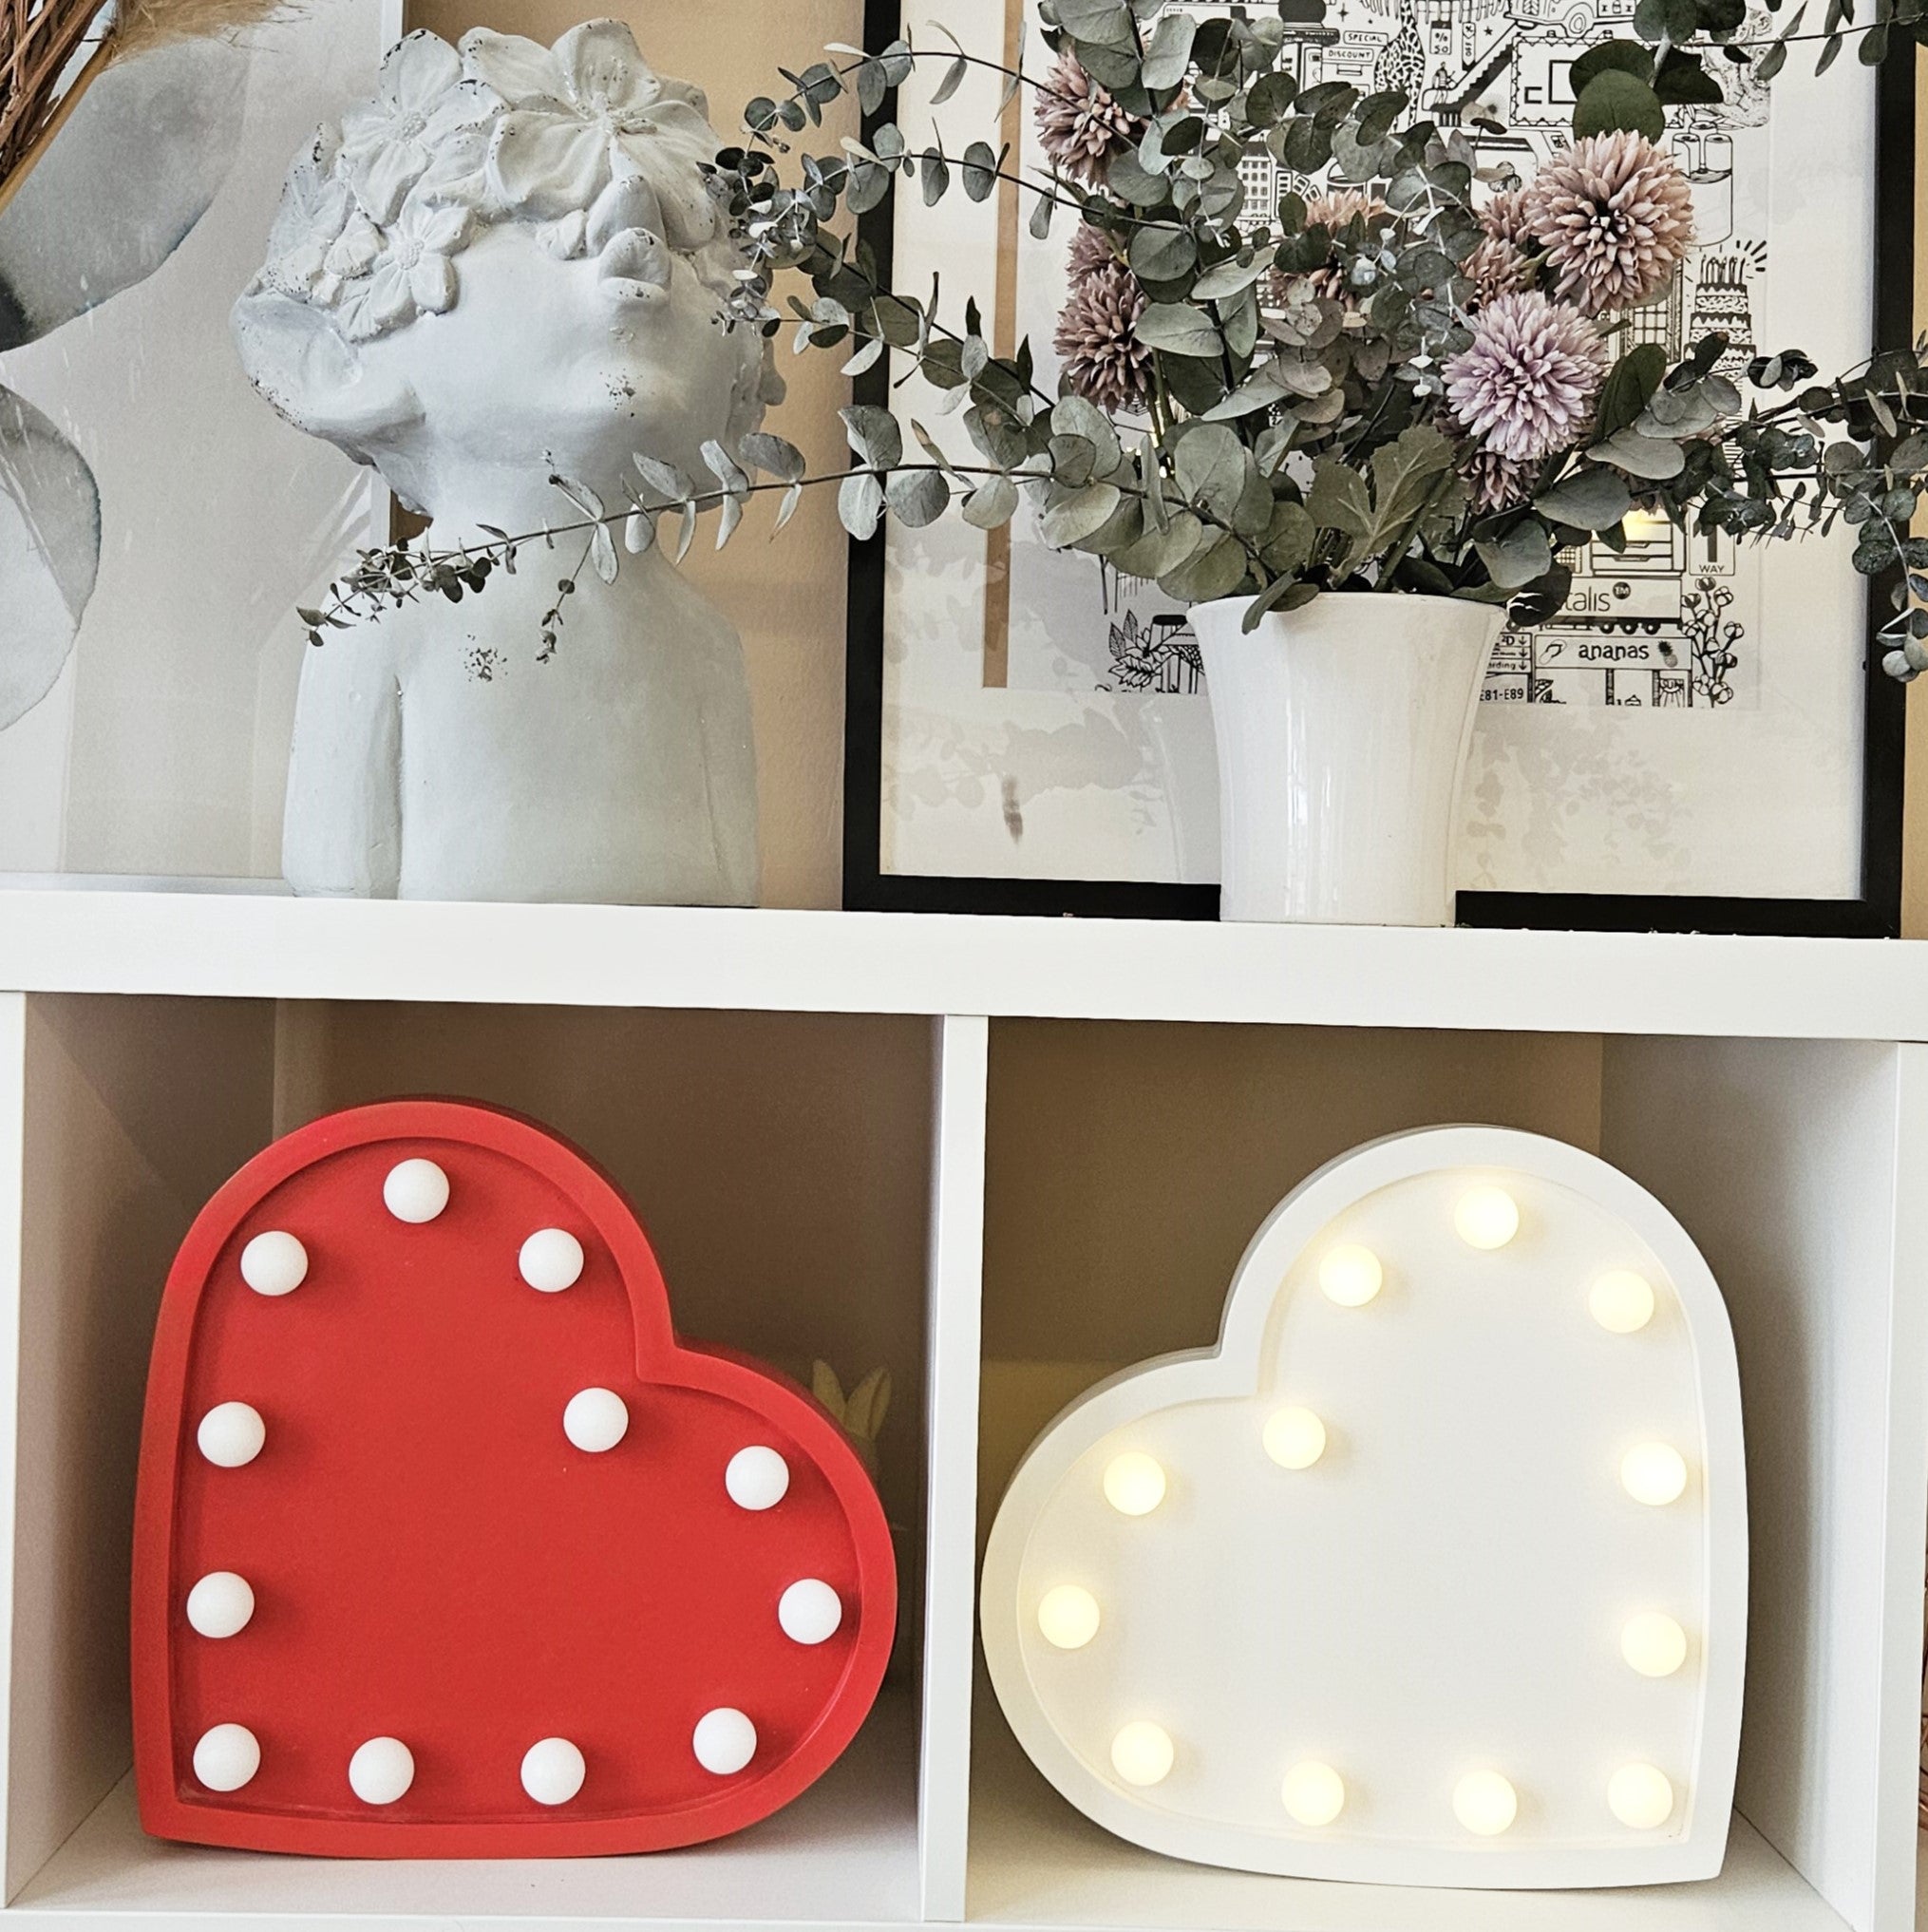 Photograph featuring two PIKU Heart Light Lamps in red and white, elegantly displayed on a surface.